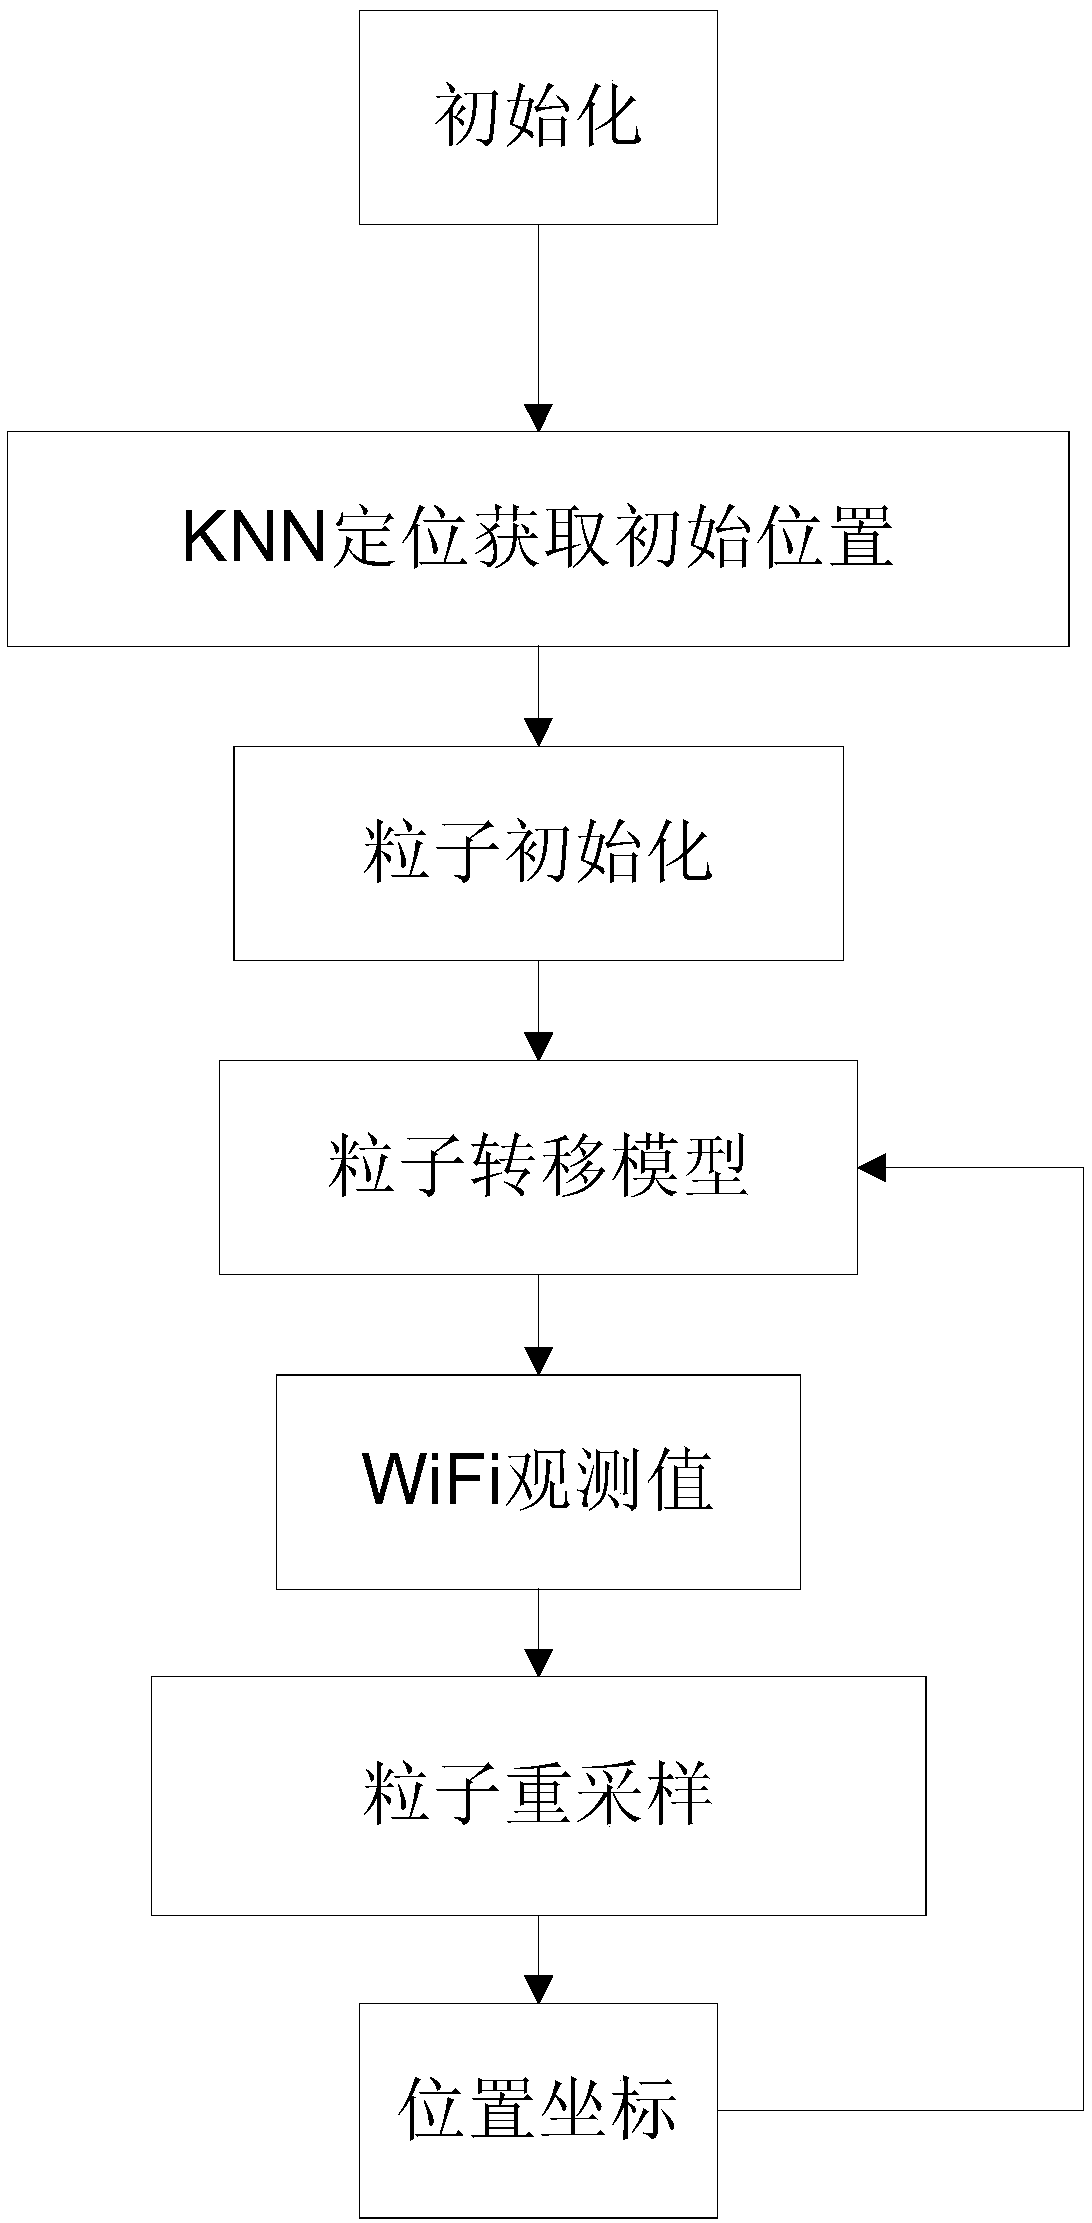 Indoor positioning navigation trolley system based on WiFi, and positioning method thereof